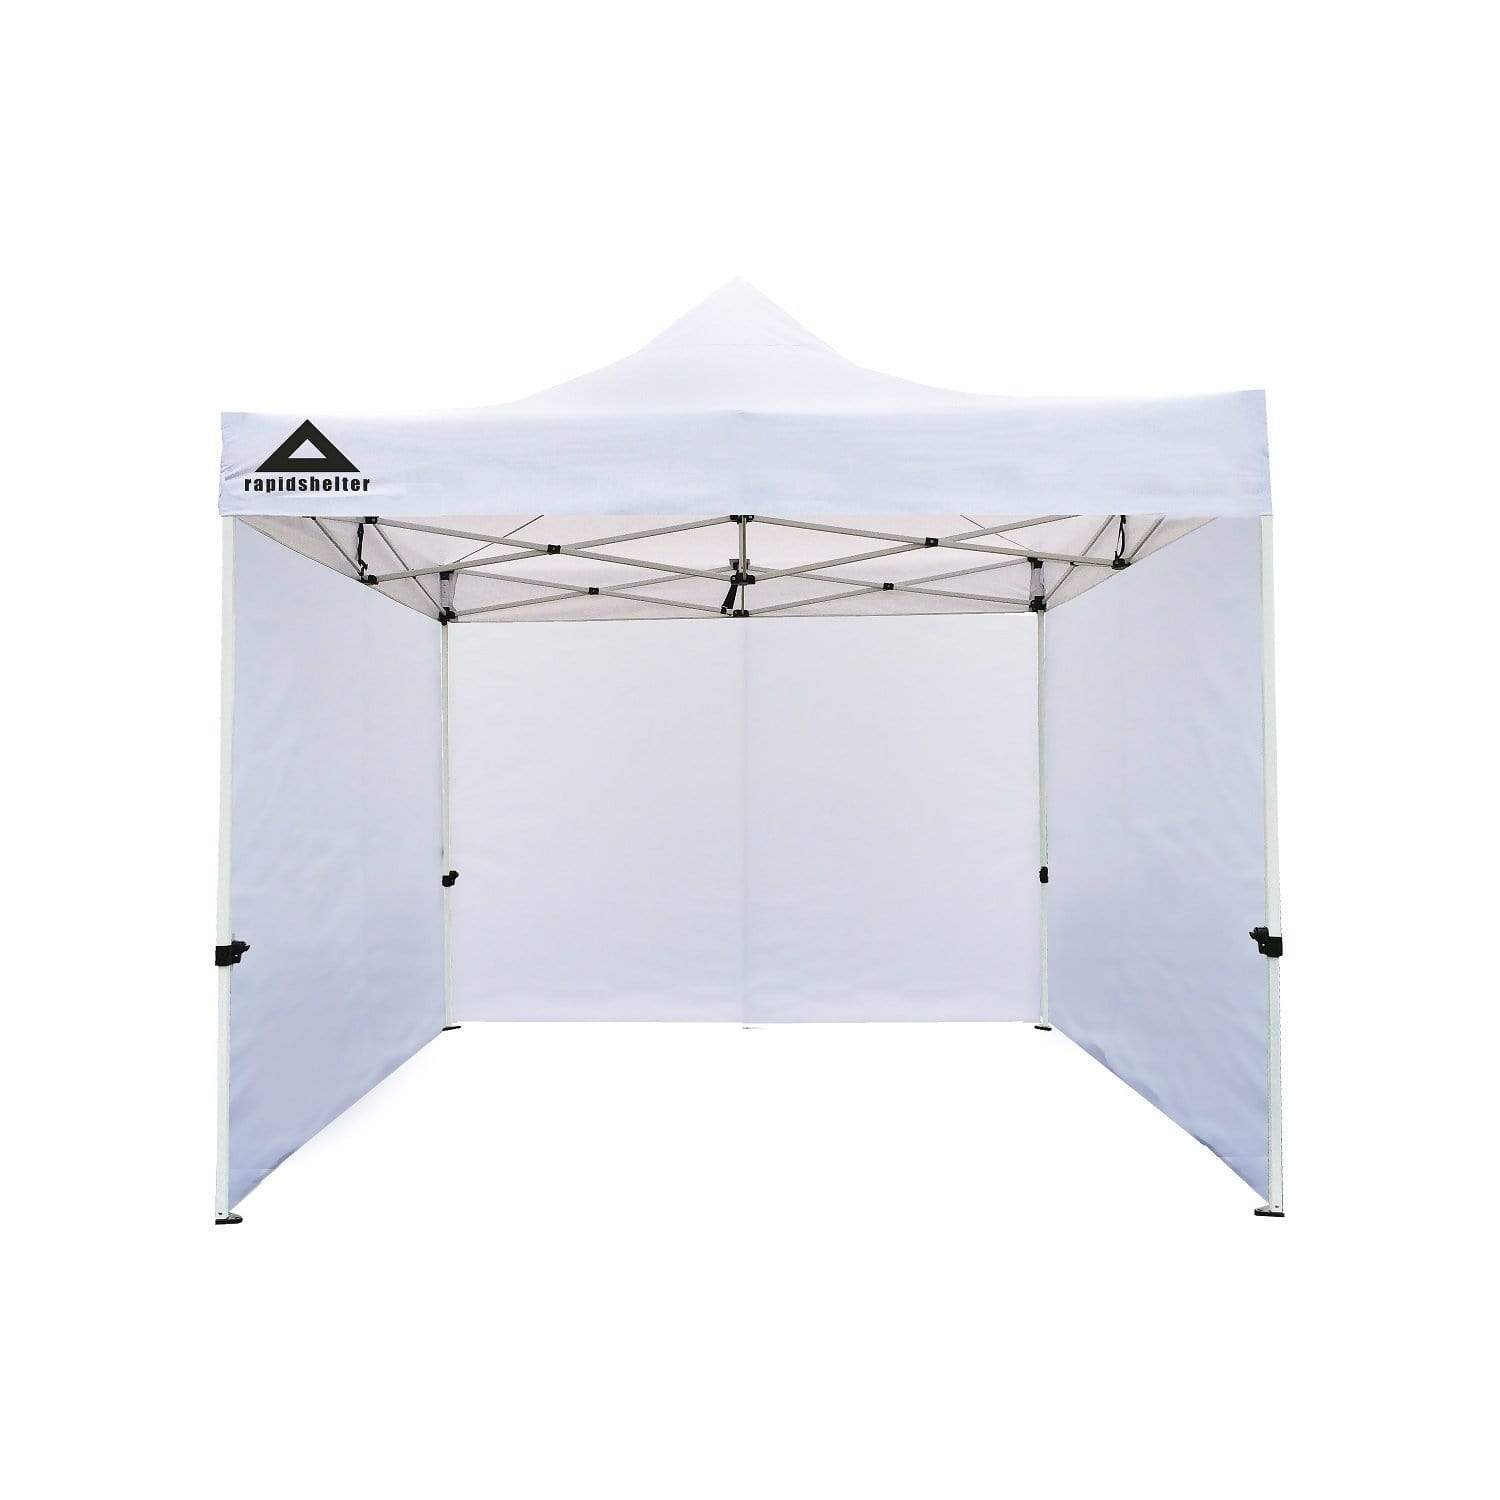 Caddis Sports Camping & Outdoor : Tents Caddis Rapid Shelter Sidewall 10x10 White